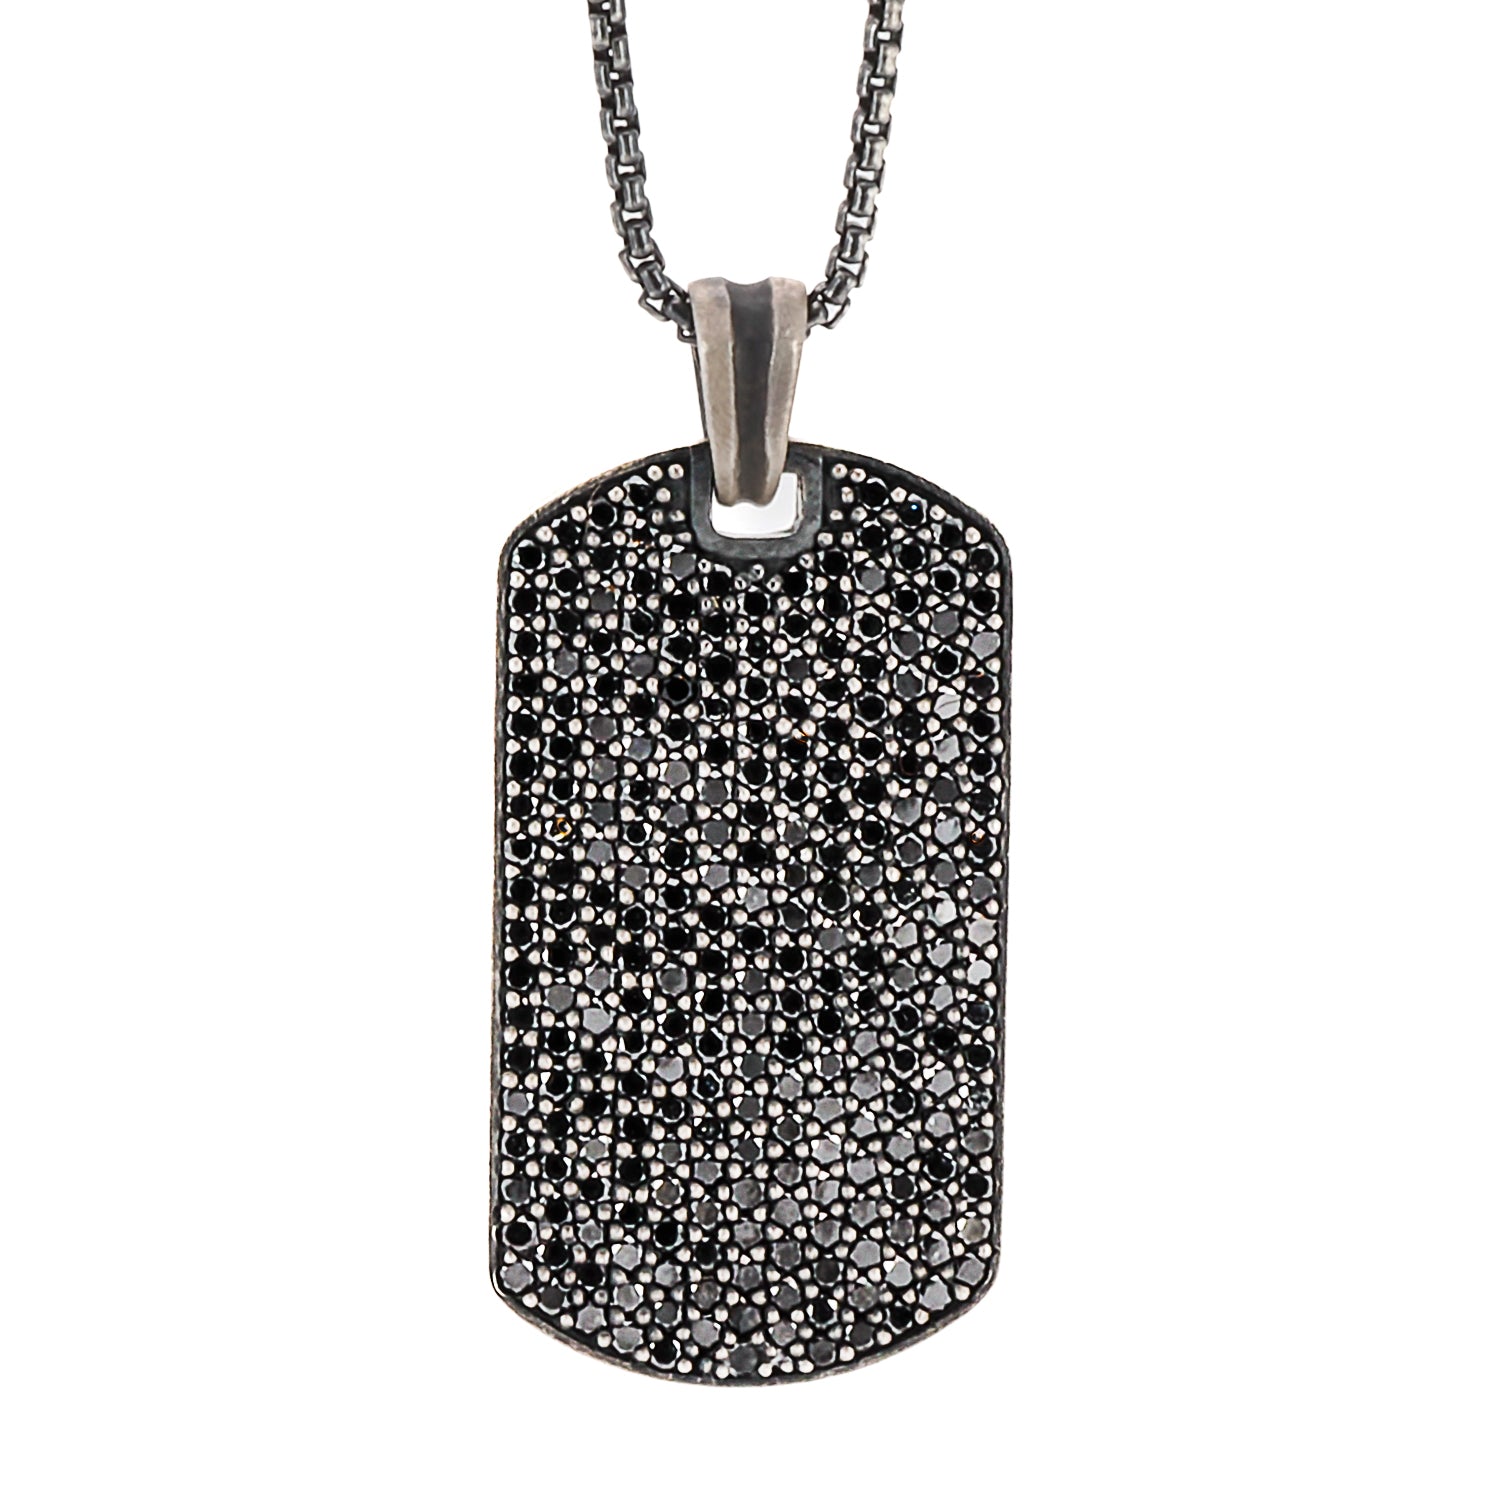 Detailed shot of the pendant on the Dog Tag Black Diamond Necklace, featuring the sparkling black diamonds that create a striking contrast against the sterling silver.